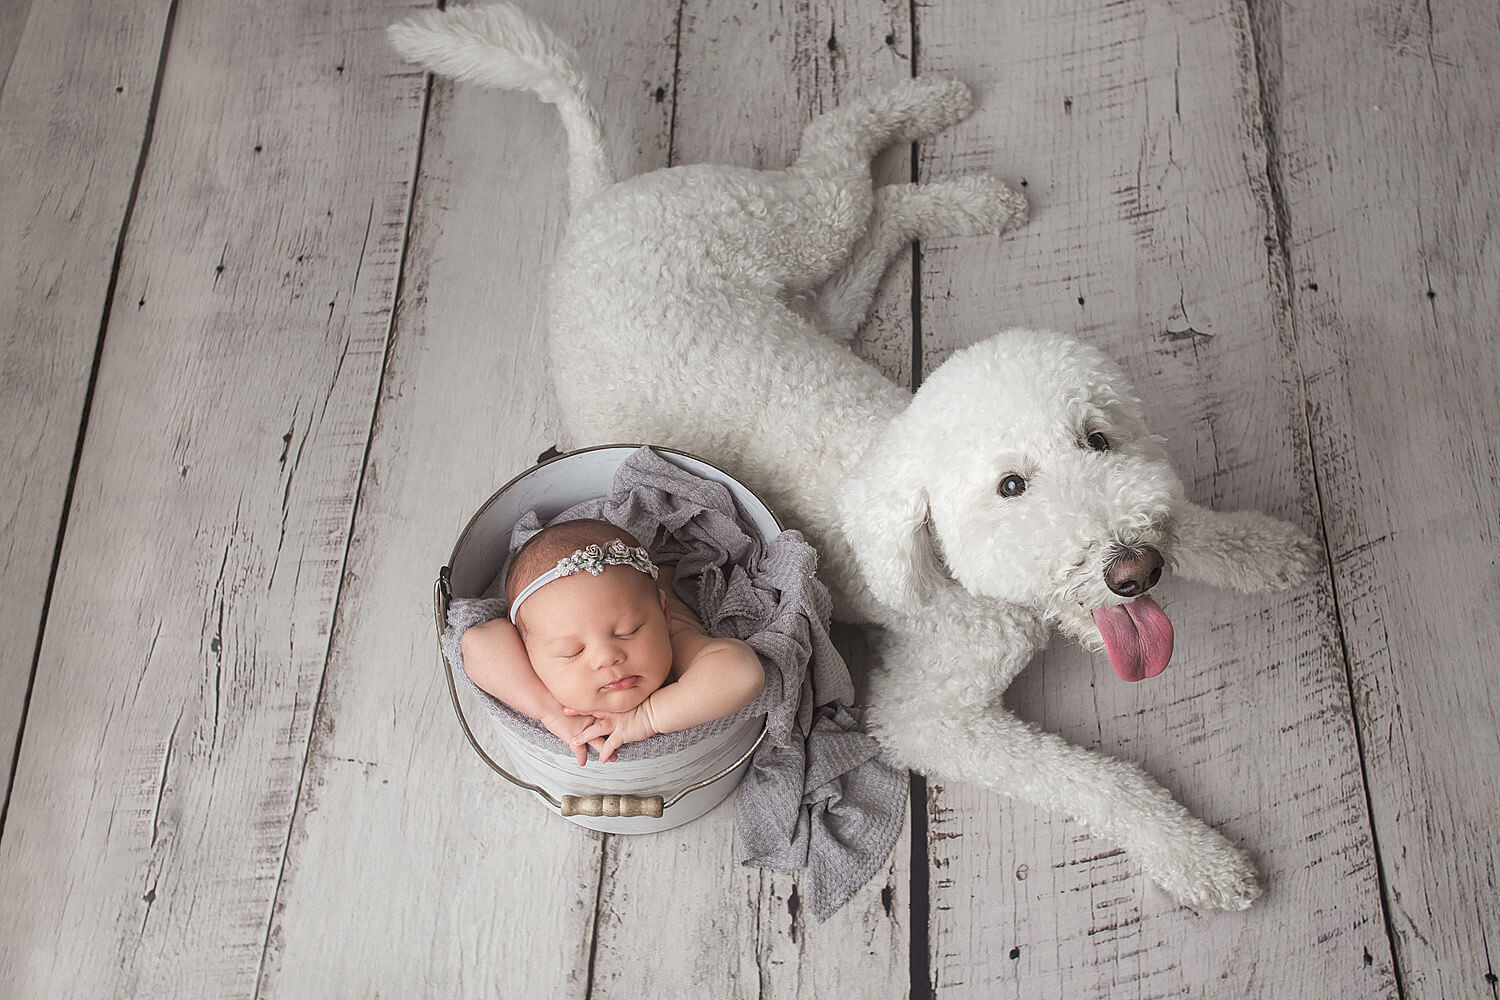 newborn baby in a bucket with poodle dog